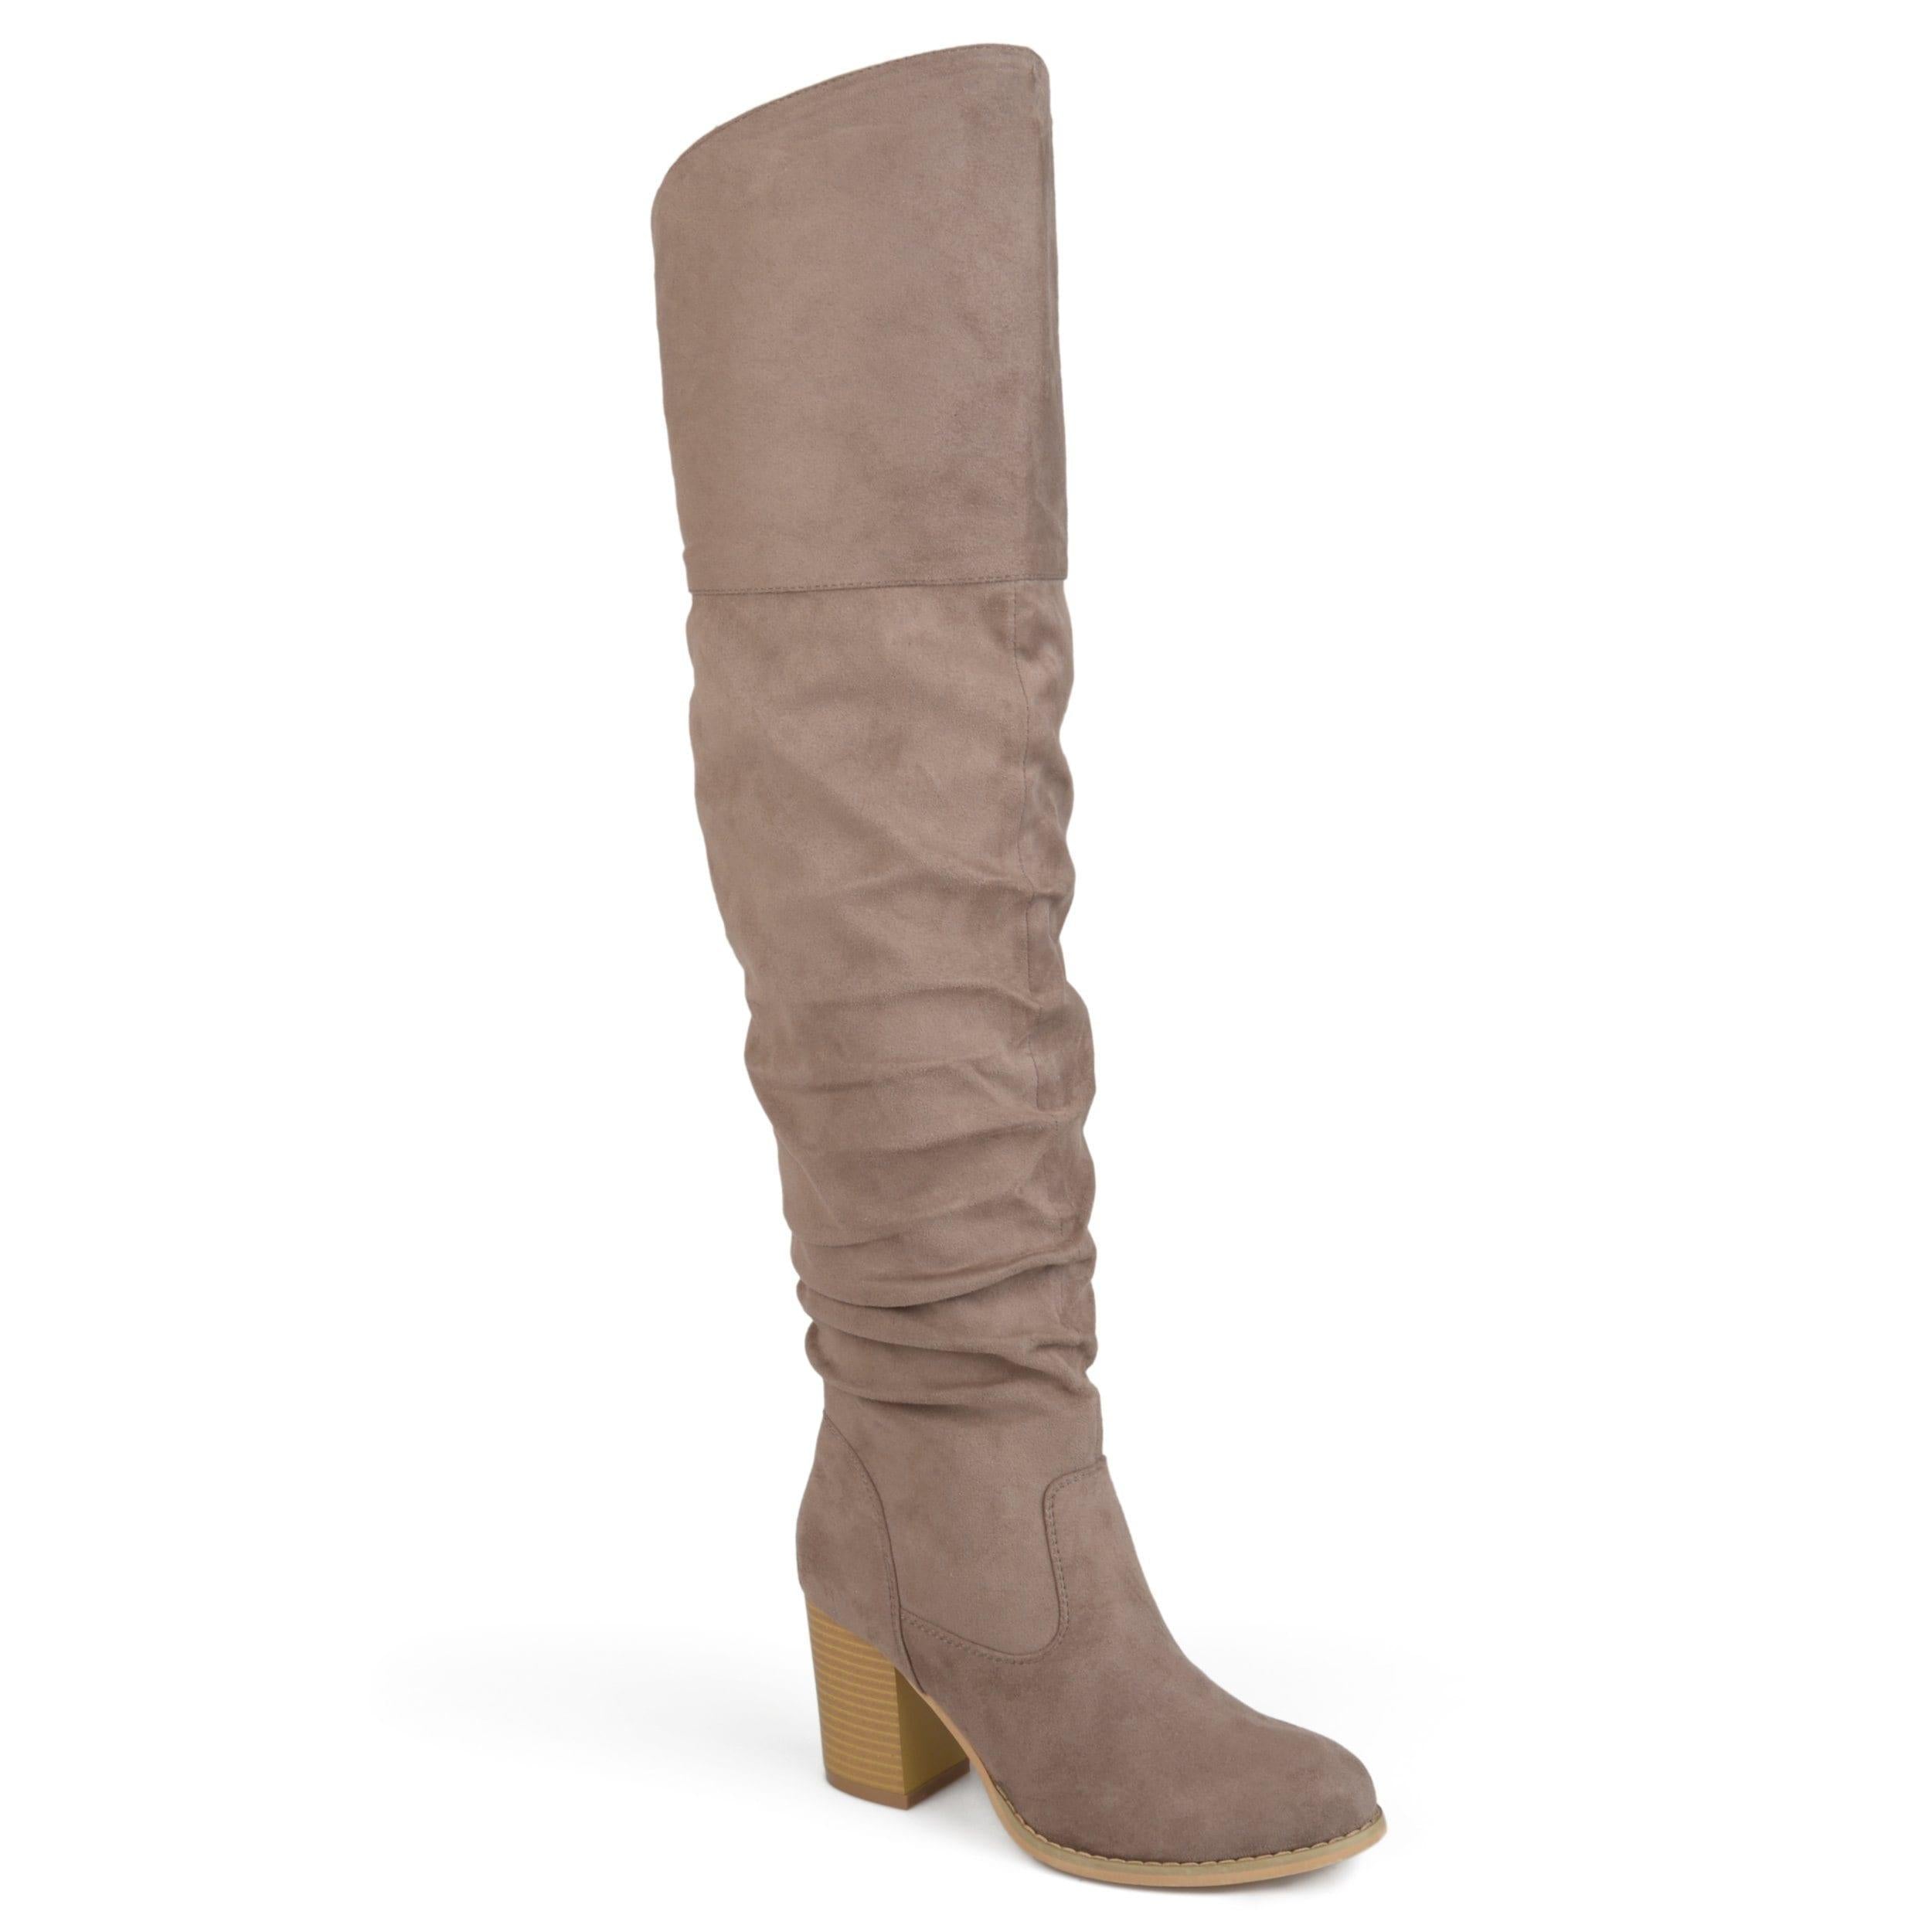 Kaison Boot | Women's Over the Knee Boot – Journee Collection